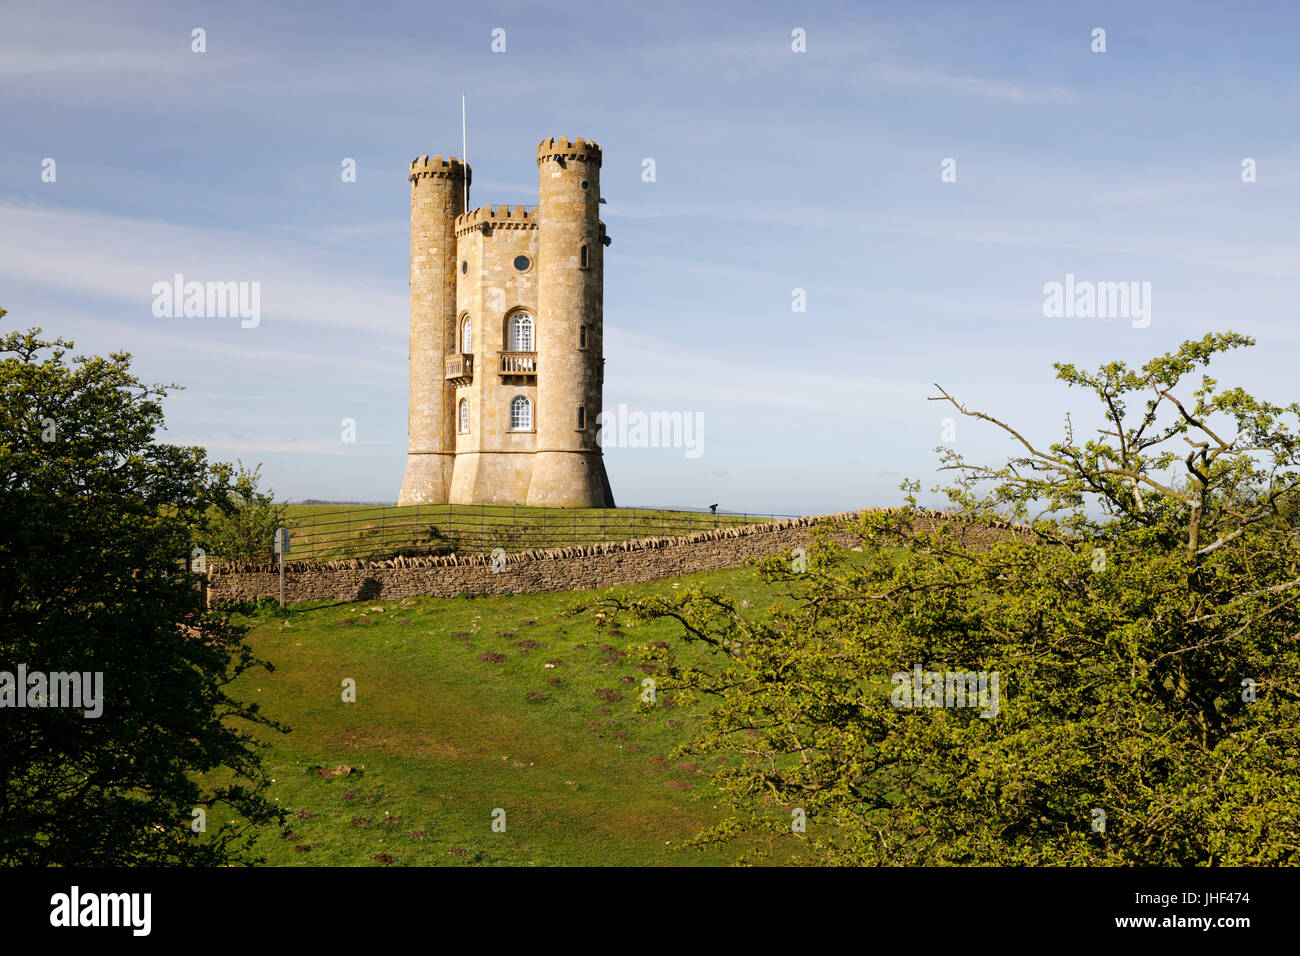 Torre di Broadway, Broadway, Cotswolds, Worcestershire, England, Regno Unito, Europa Foto Stock